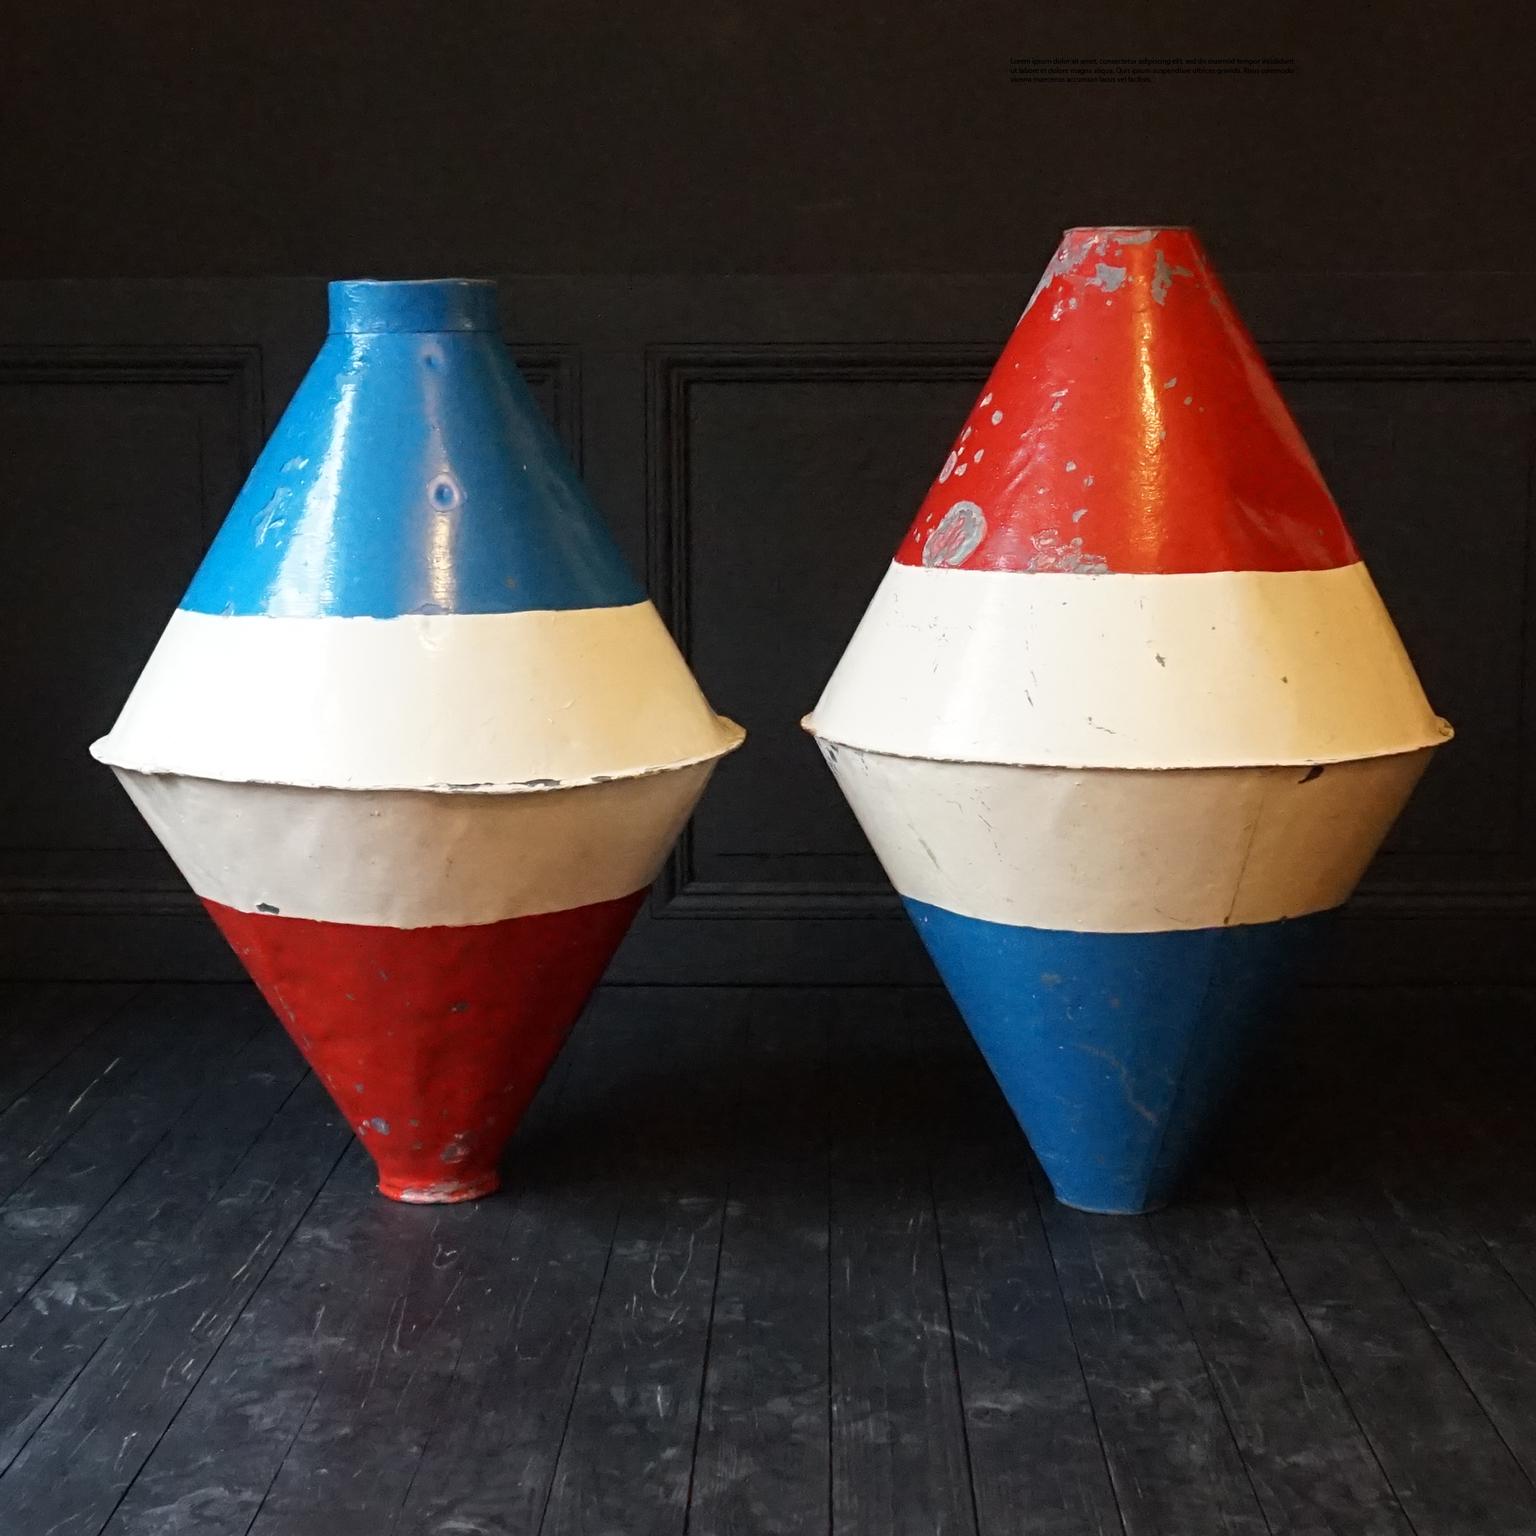 Set of two very decorative handmade and hand painted antique large early 1920s Dutch marine metal buoys.
They are diamond or biconical shaped, and painted in the colours of the Dutch flag, red white and blue. 
Hollow inside, to place over a rope or